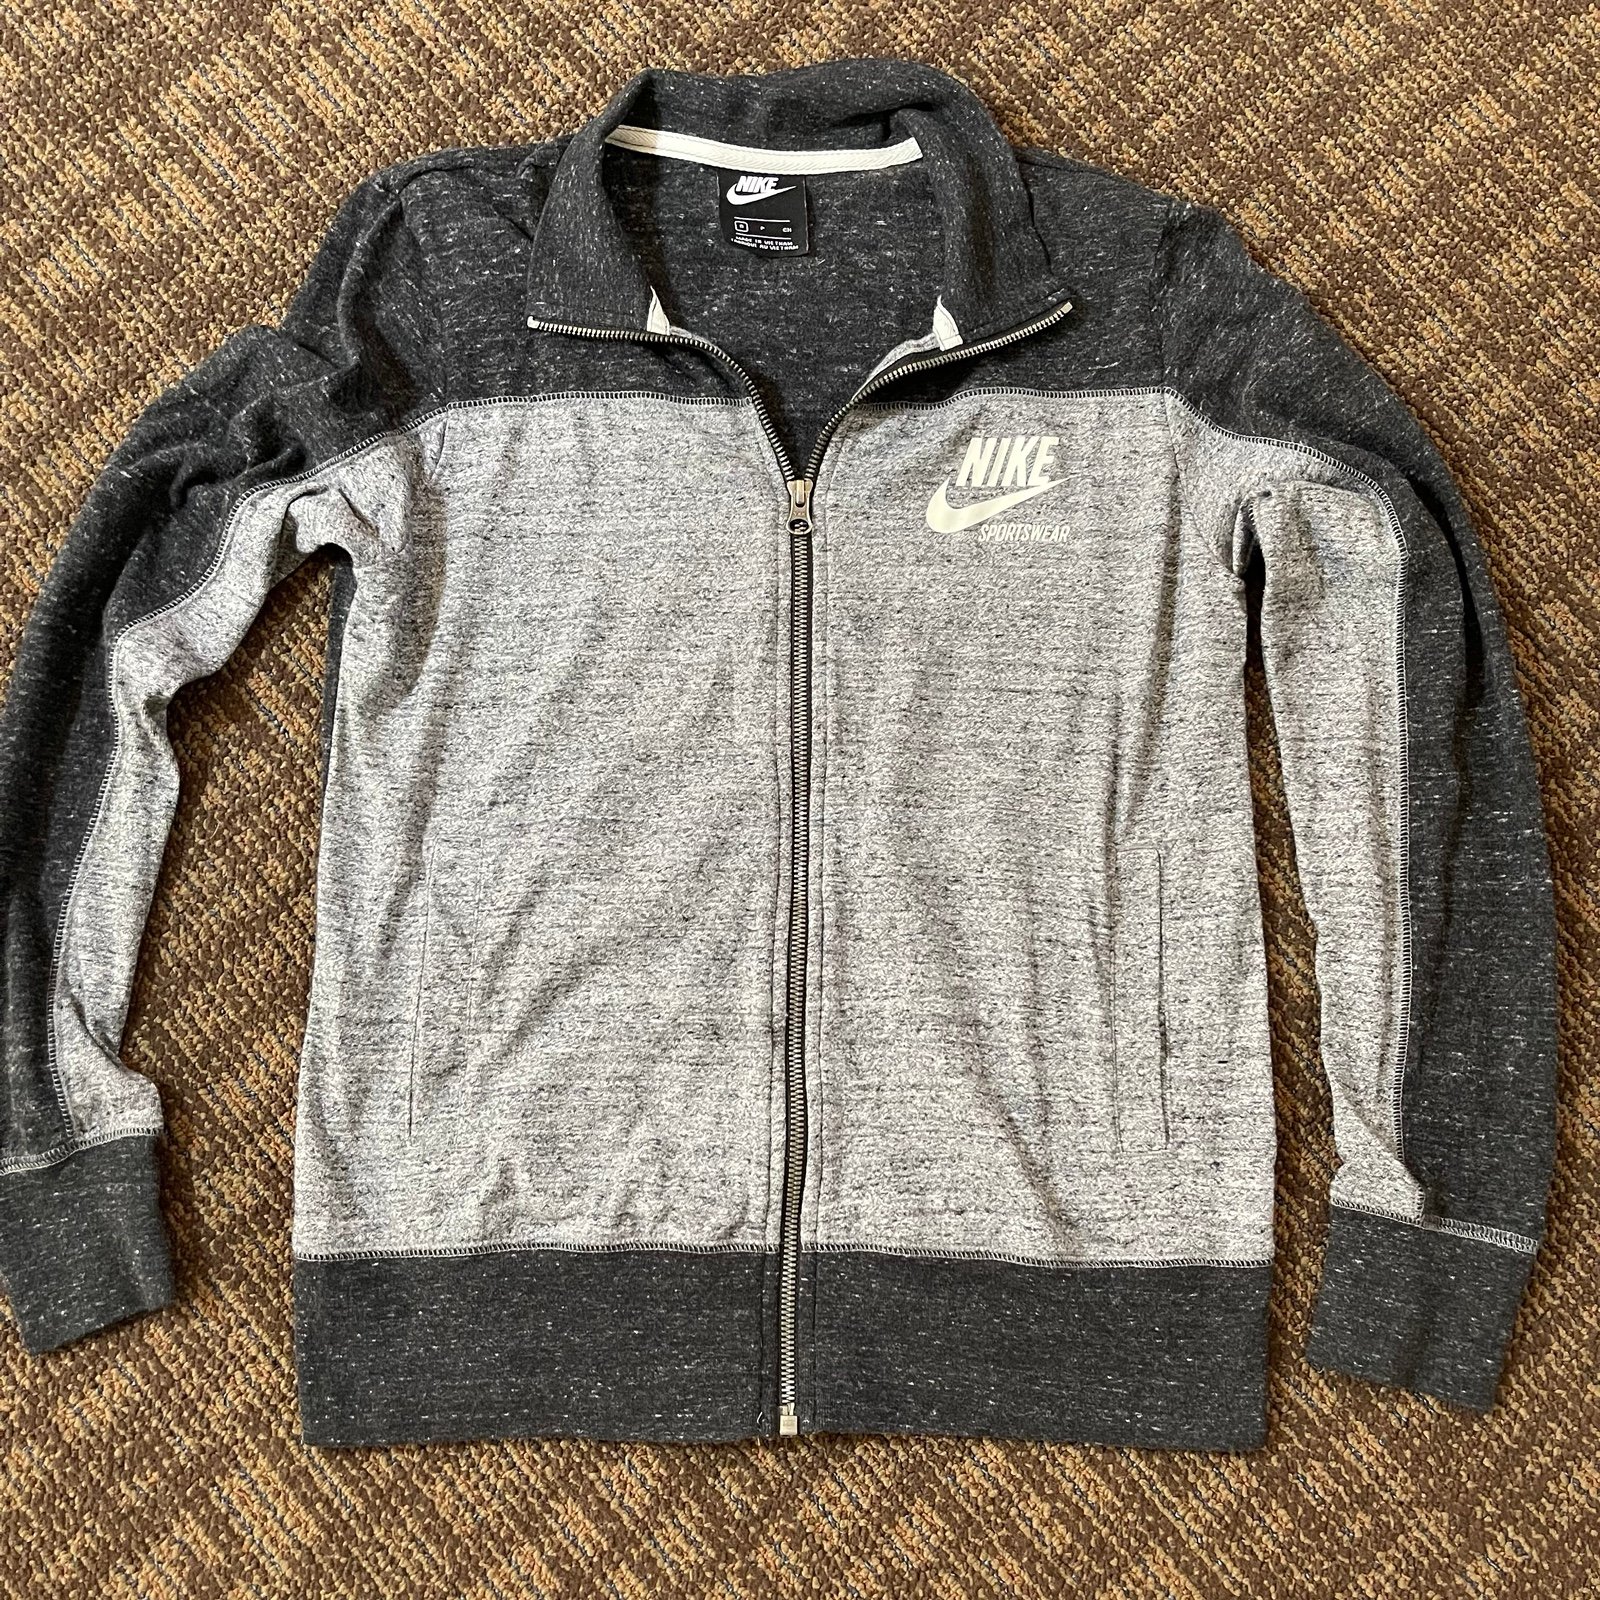 Nike Running Jacket Gray and Black Small EUC.Pre-owed gently used. In good condi An8XAC7TT